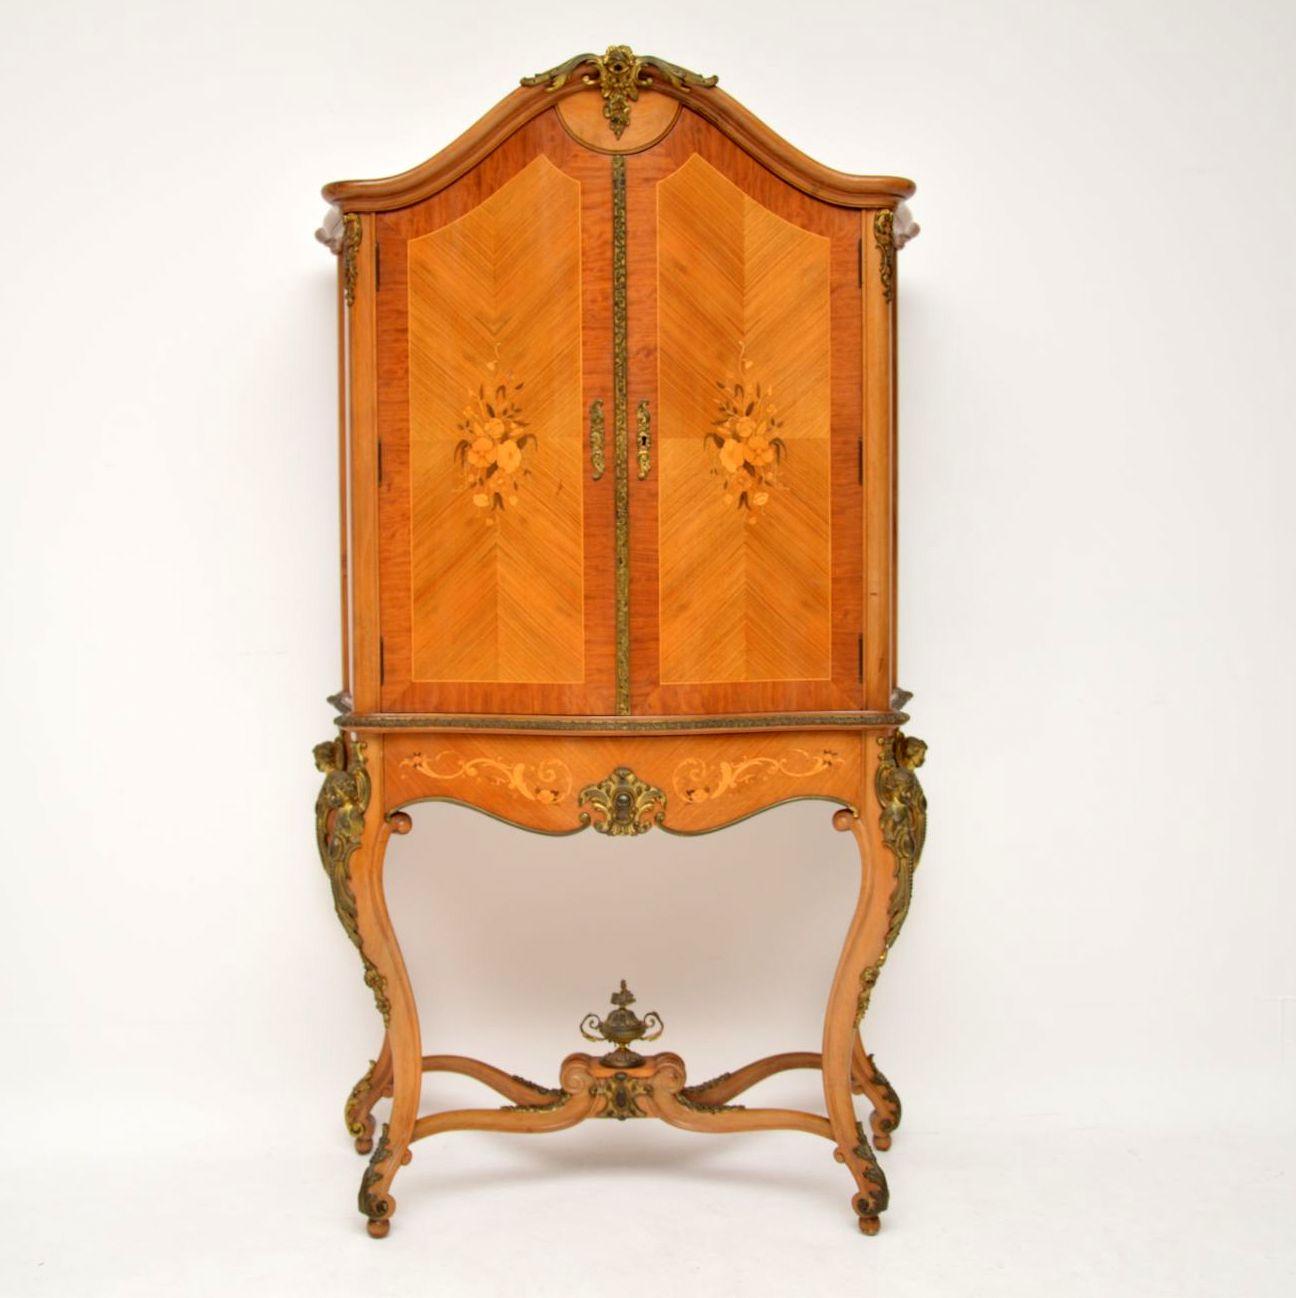 This French antique Kingwood drinks cabinet has a wonderful shape & some exceptional fine details. It has a serpentine shaped front, two doors with floral marquetry panels & two more on the sides, more marquetry on the bottom drawer & on the bottom